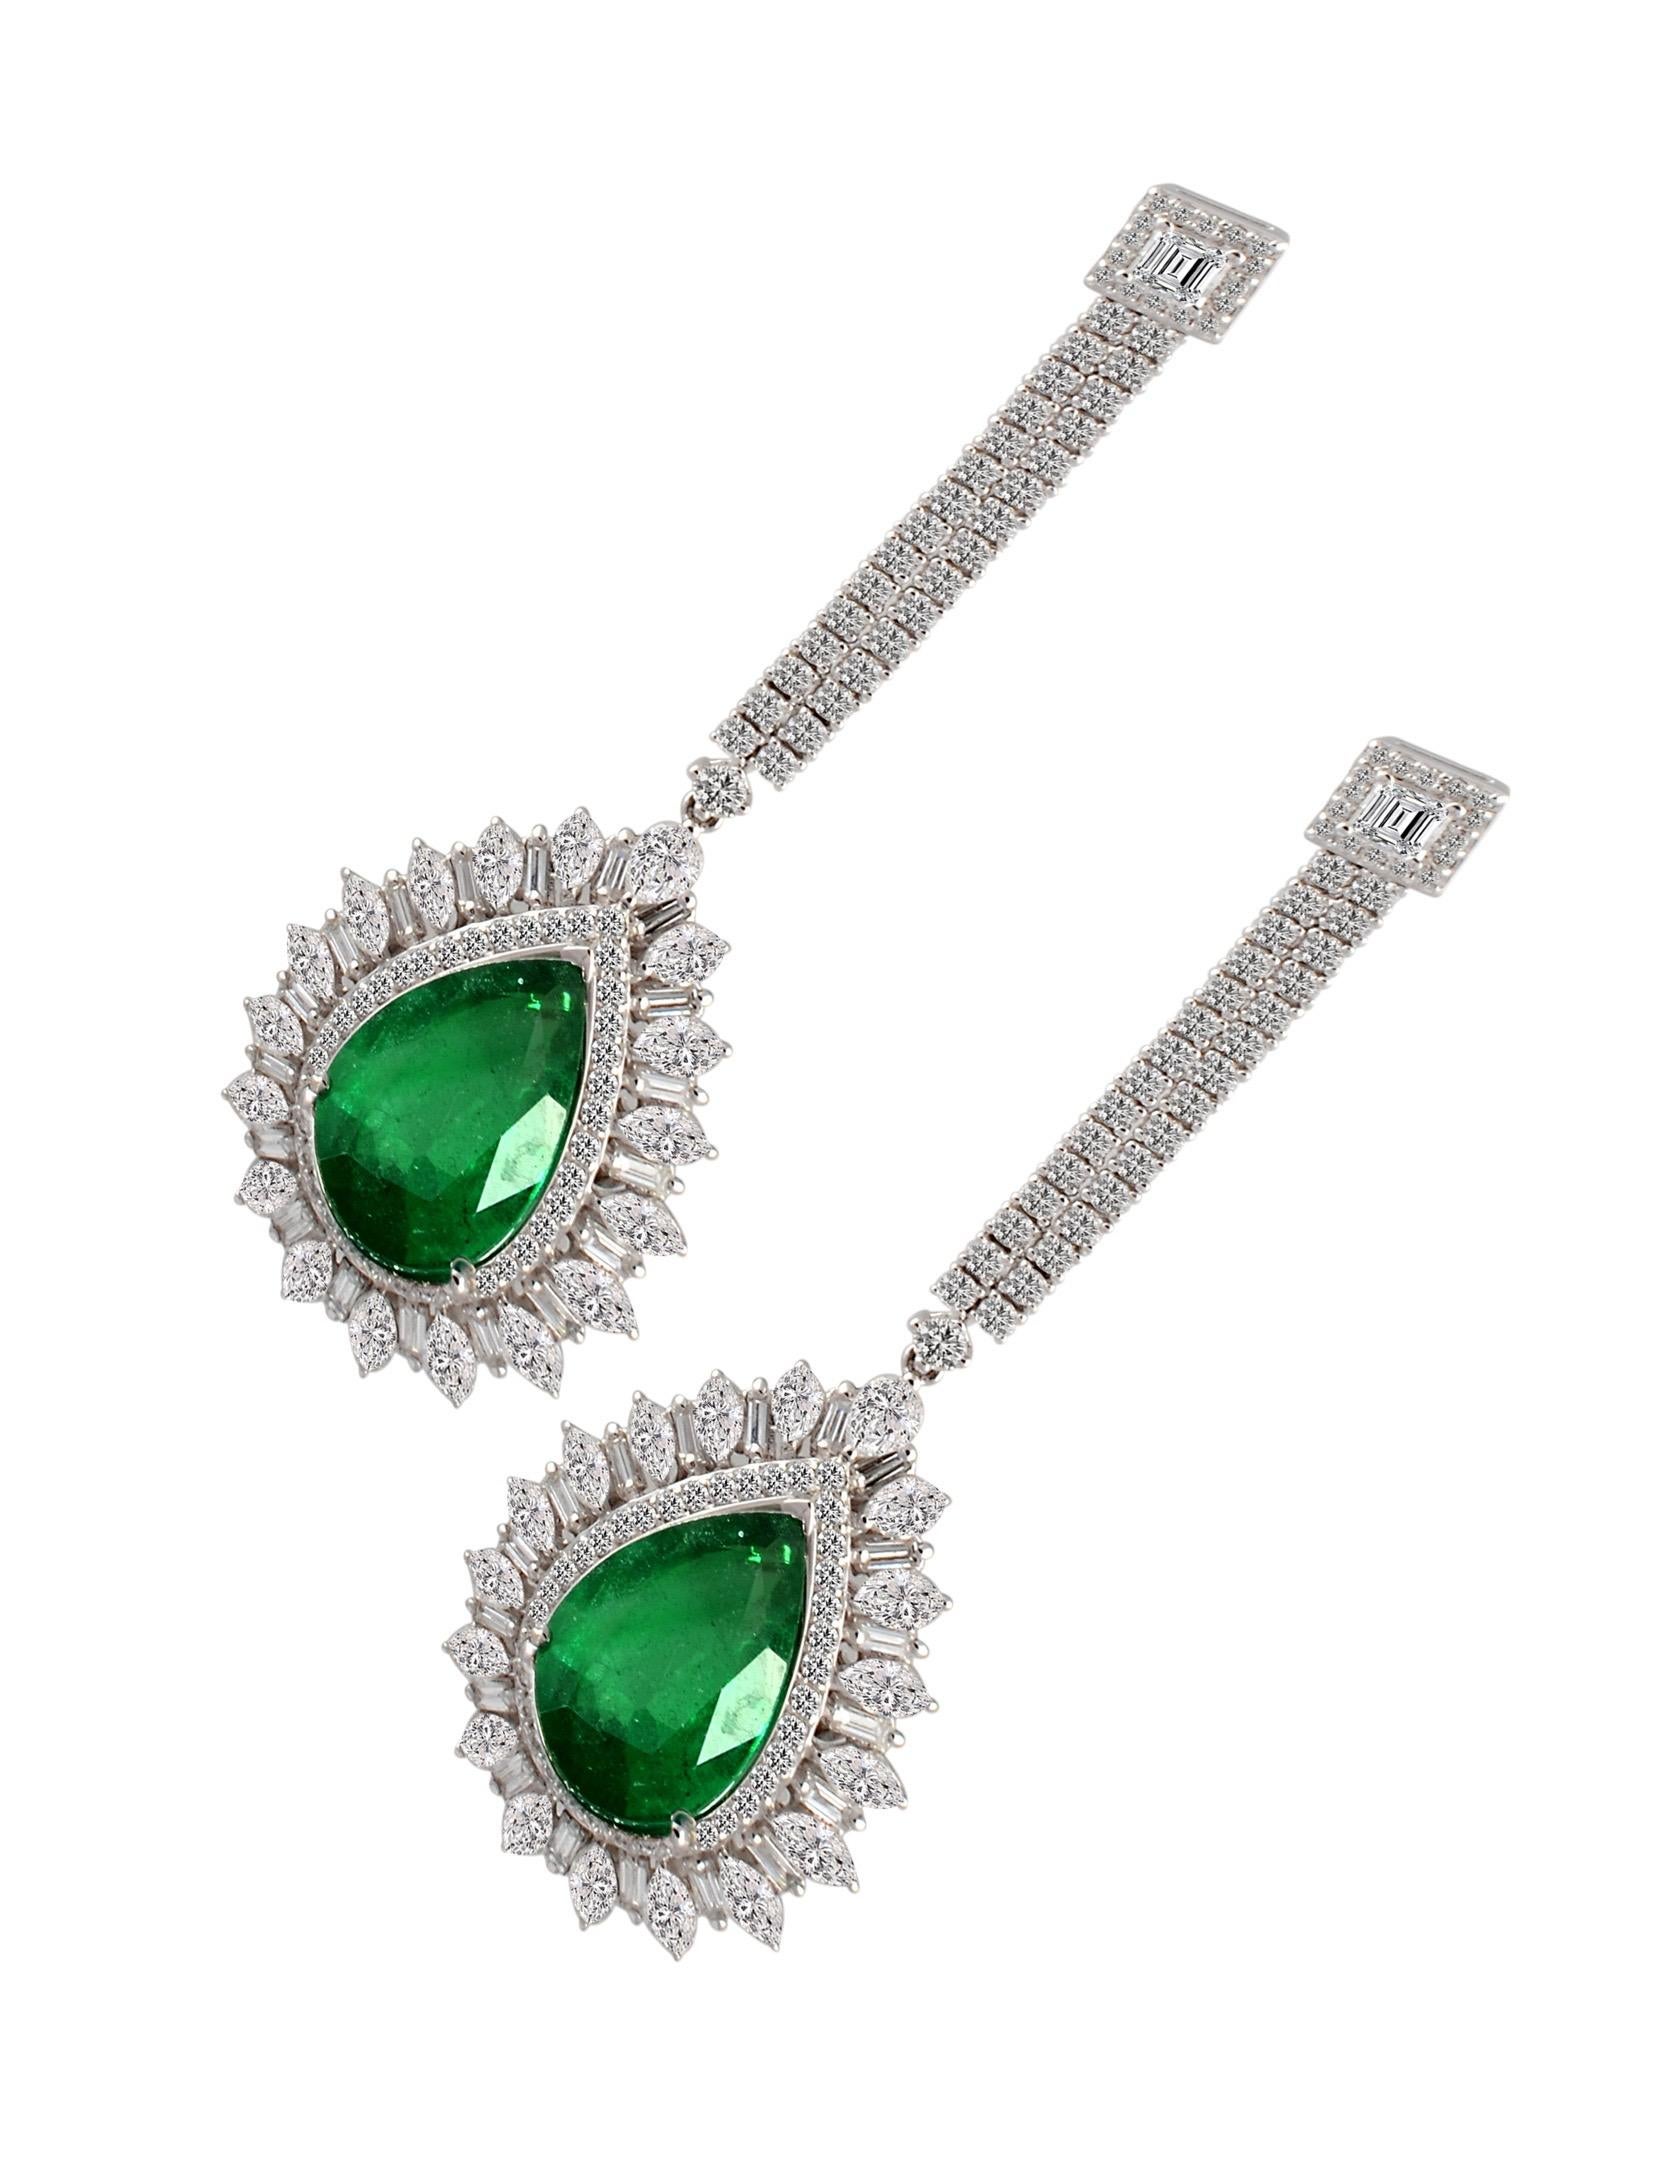 11 Ct Pear Shape Zambian Emerald & 6 Ct Diamonds Drop Earrings 18K White Gold In Excellent Condition In New York, NY